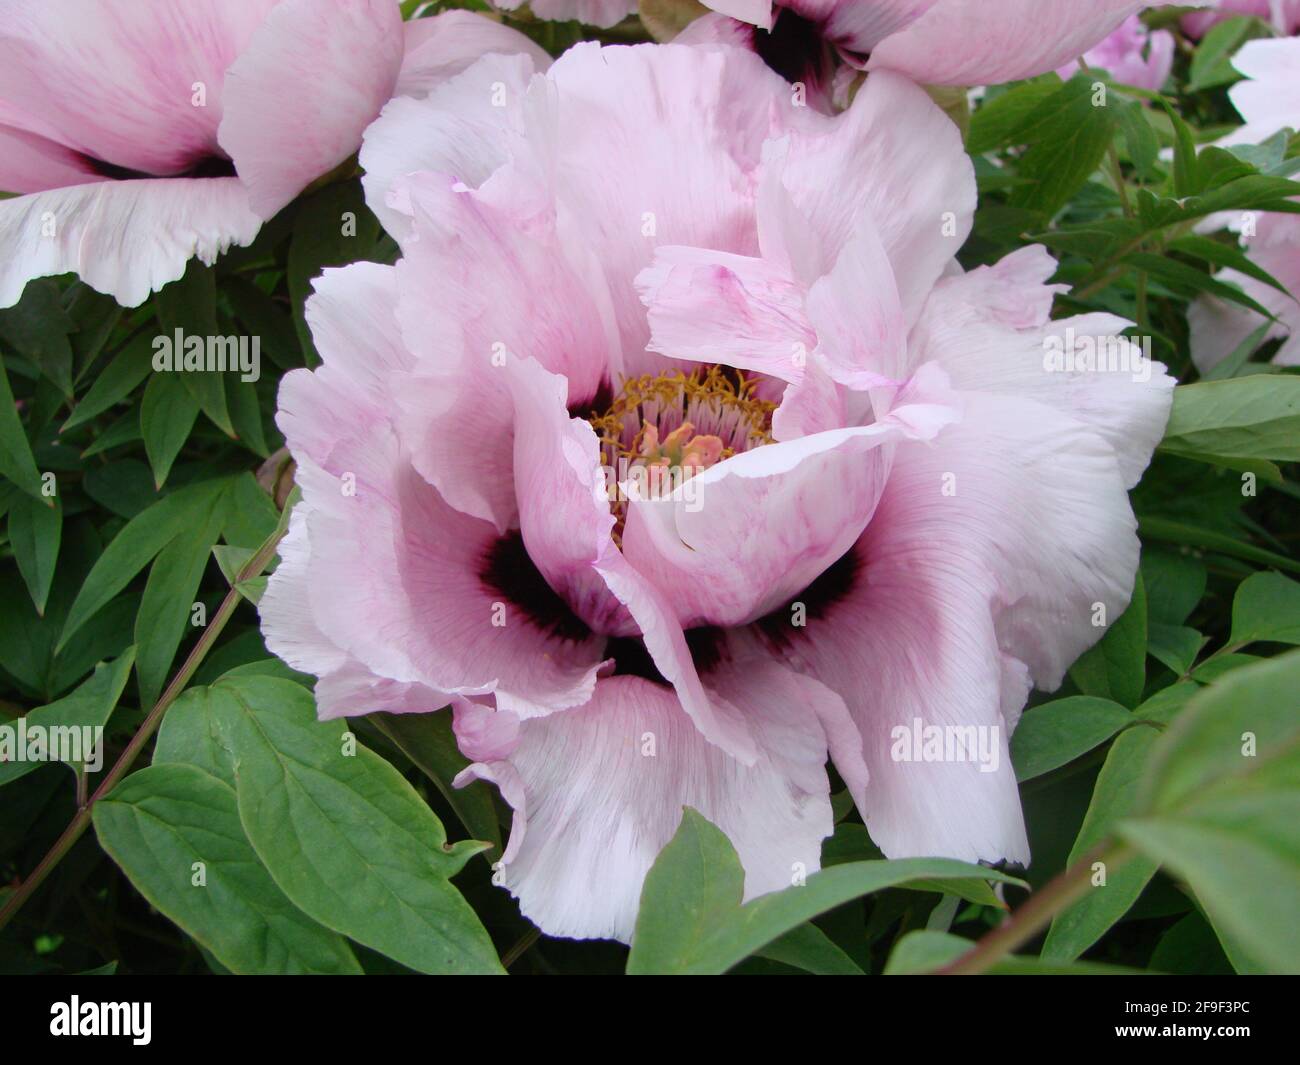 Pink Peony flower, Paeonia suffruticosa, in garden . important symbol in Chinese culture. national flower for China. Stock Photo